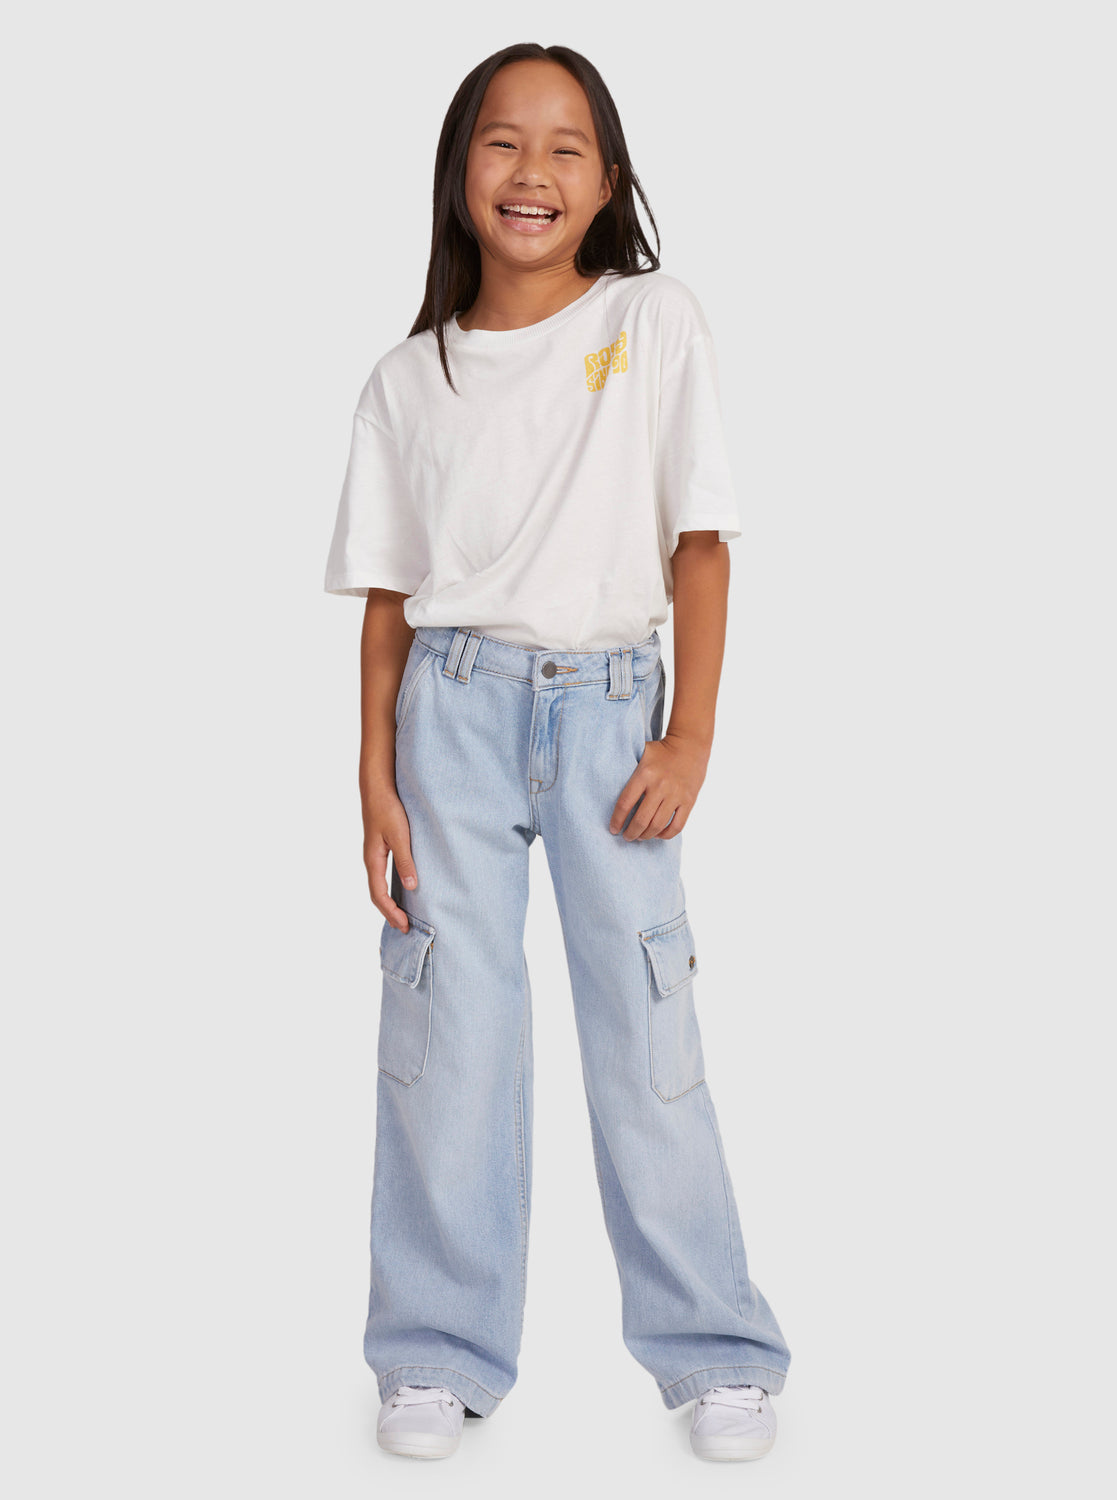 Buy Baggy Jeans For Girls Online In India At Best Prices | Tata CLiQ